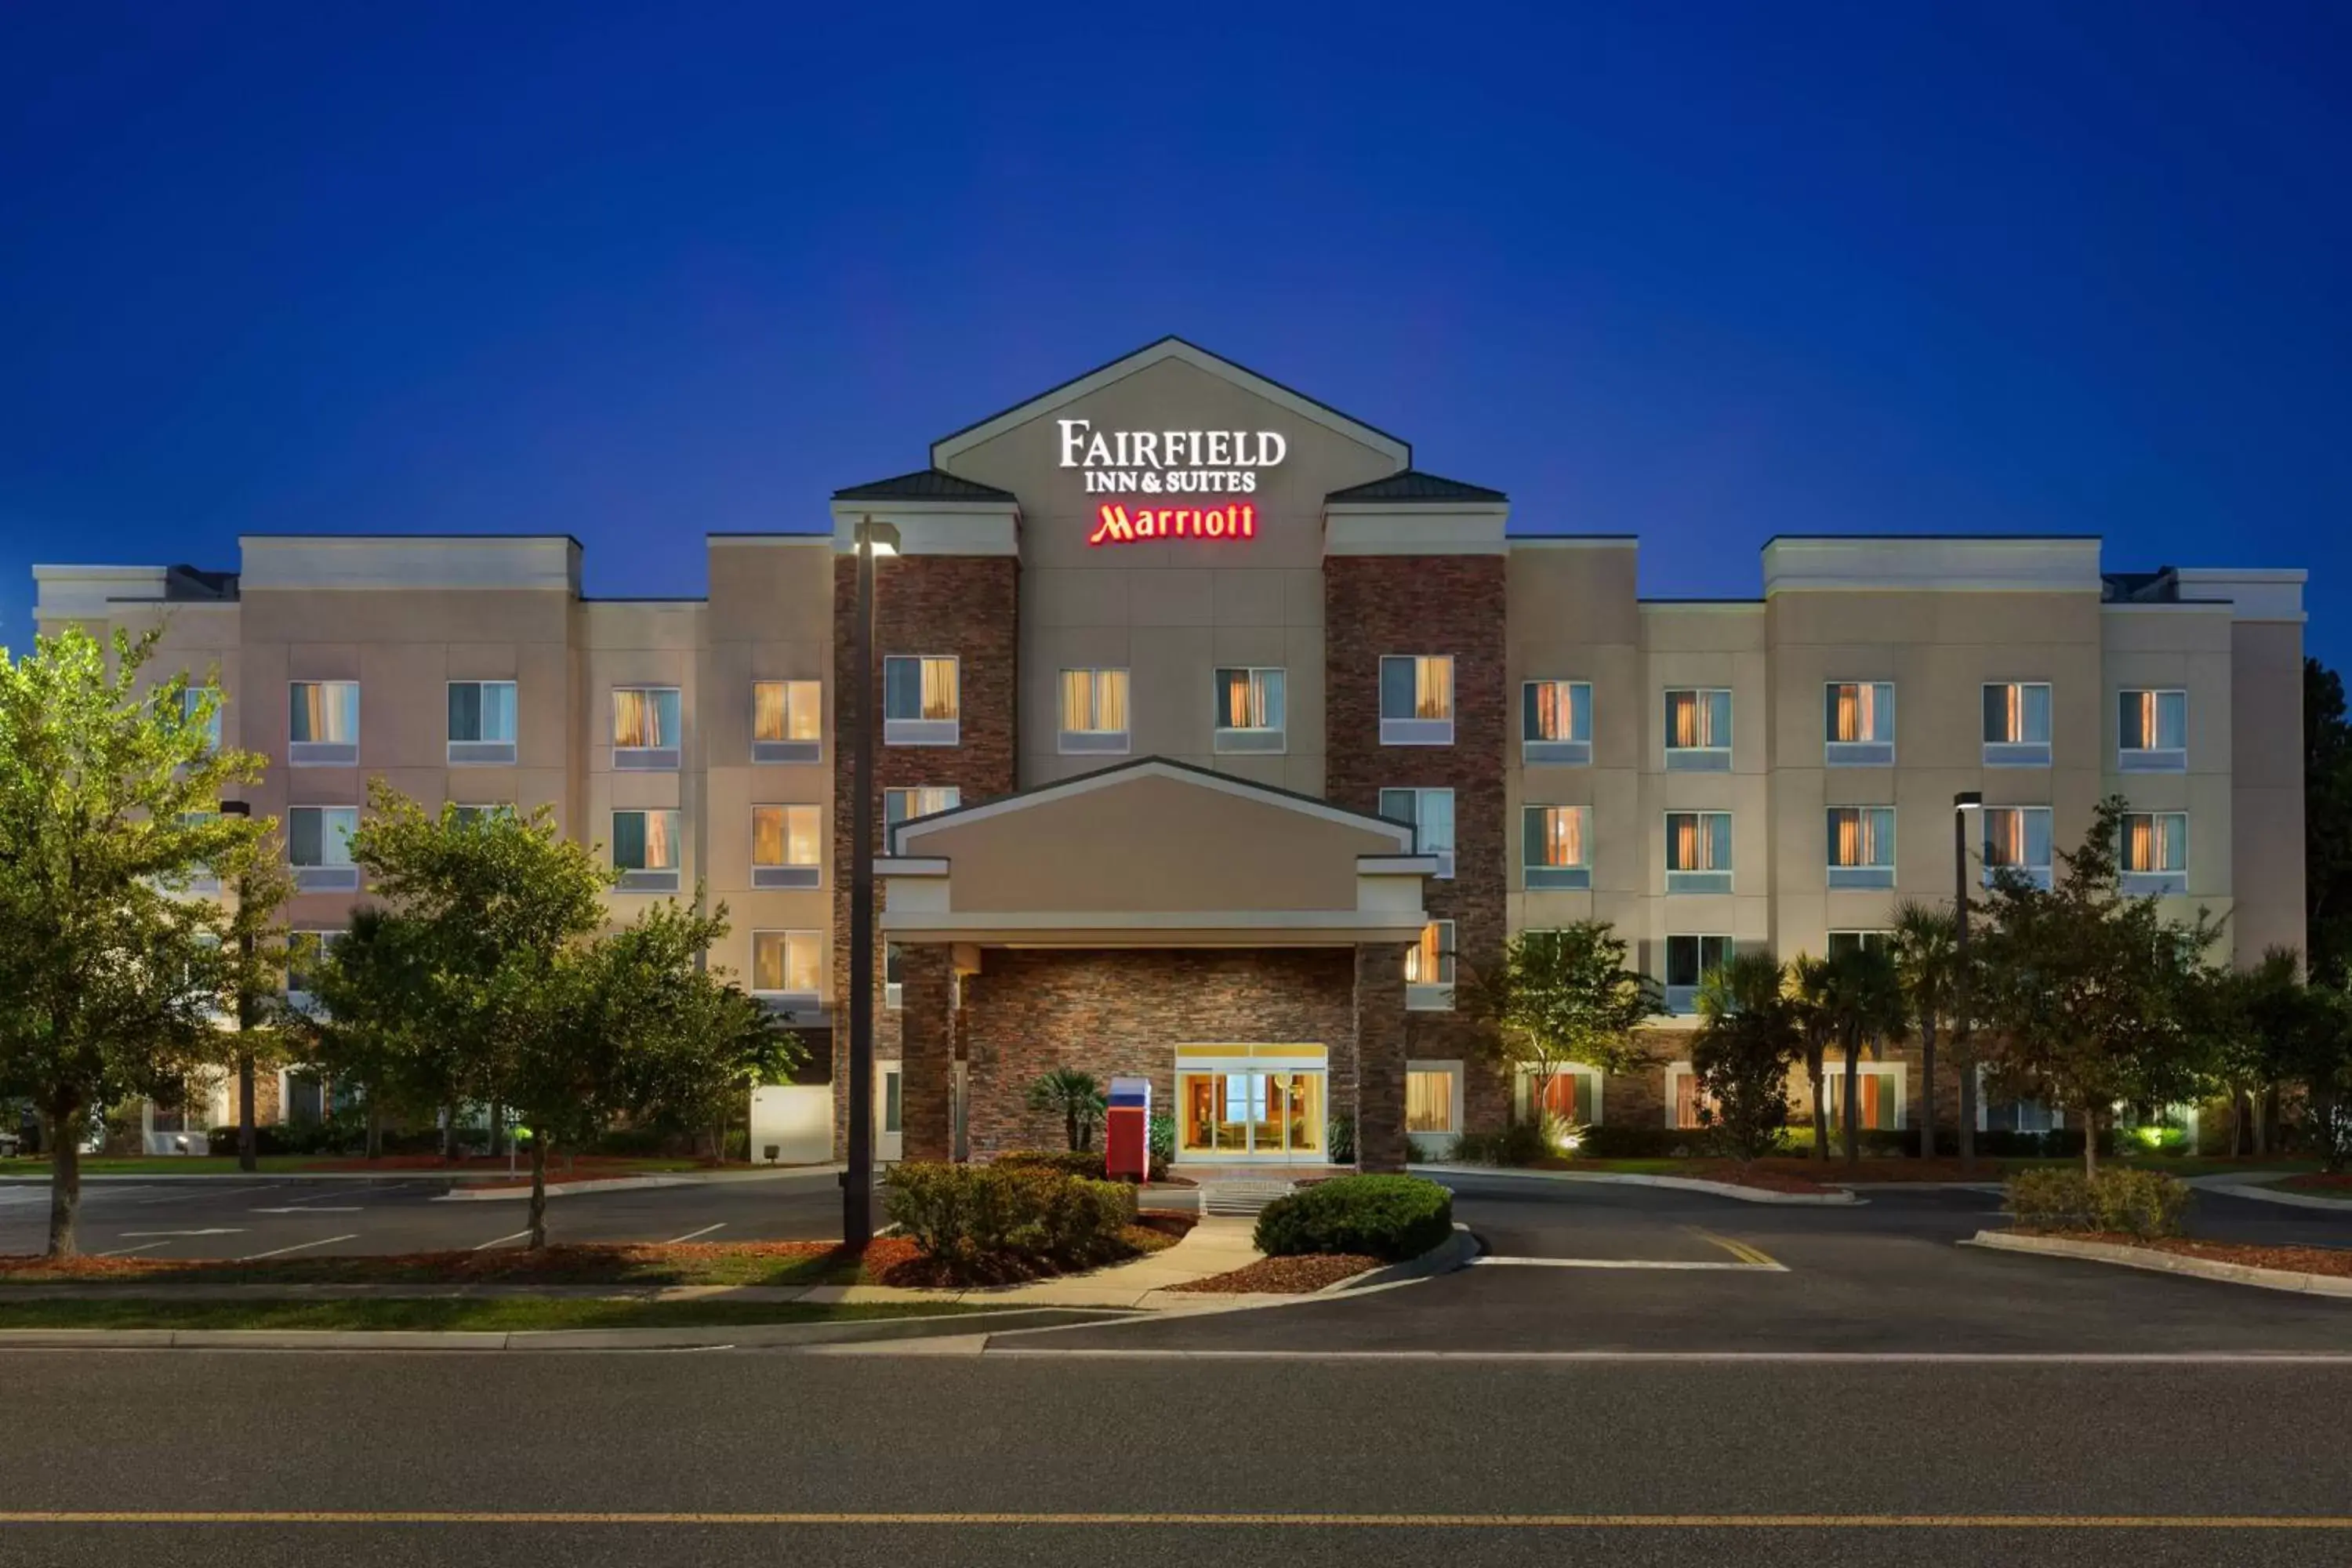 Property Building in Fairfield Inn & Suites Jacksonville West/Chaffee Point